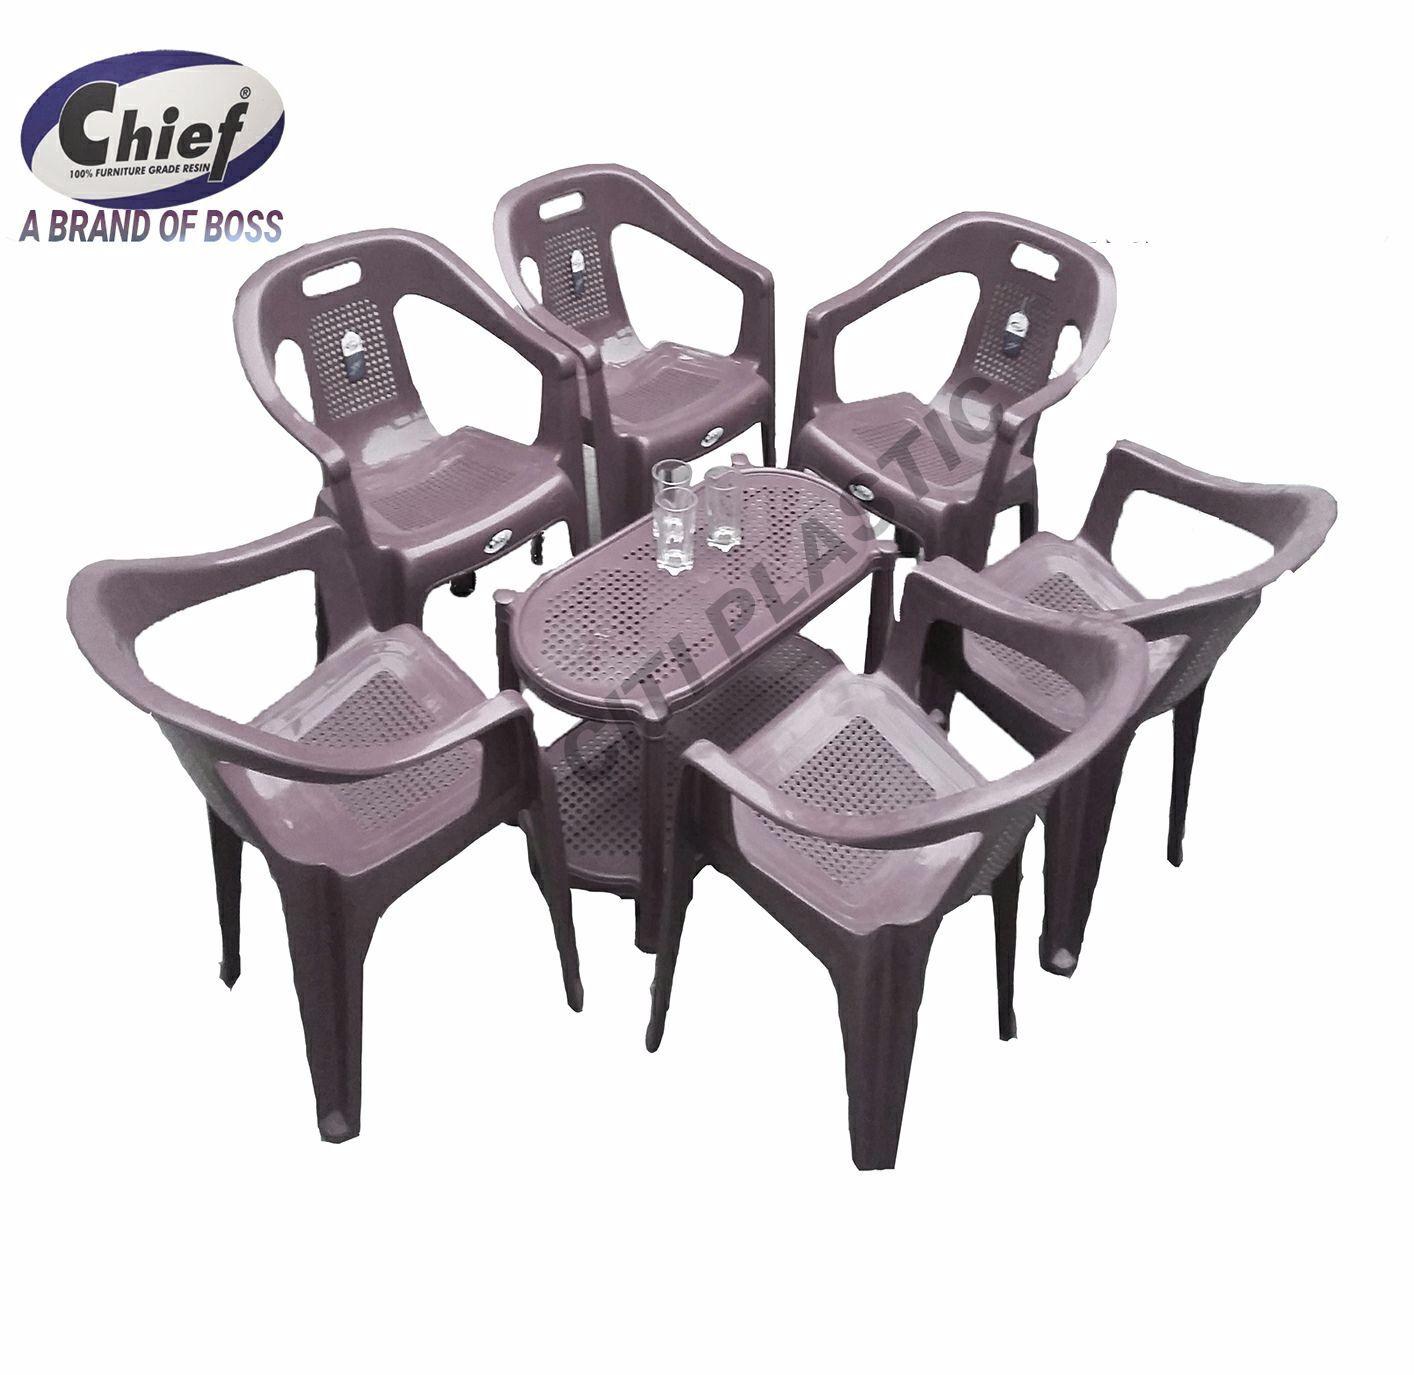 Plastic Chairs Boss Full Plastic Chairs of 6 Plastic Chairs and Table- Grey: Buy Online at Best Prices in Pakistan | Daraz.pk